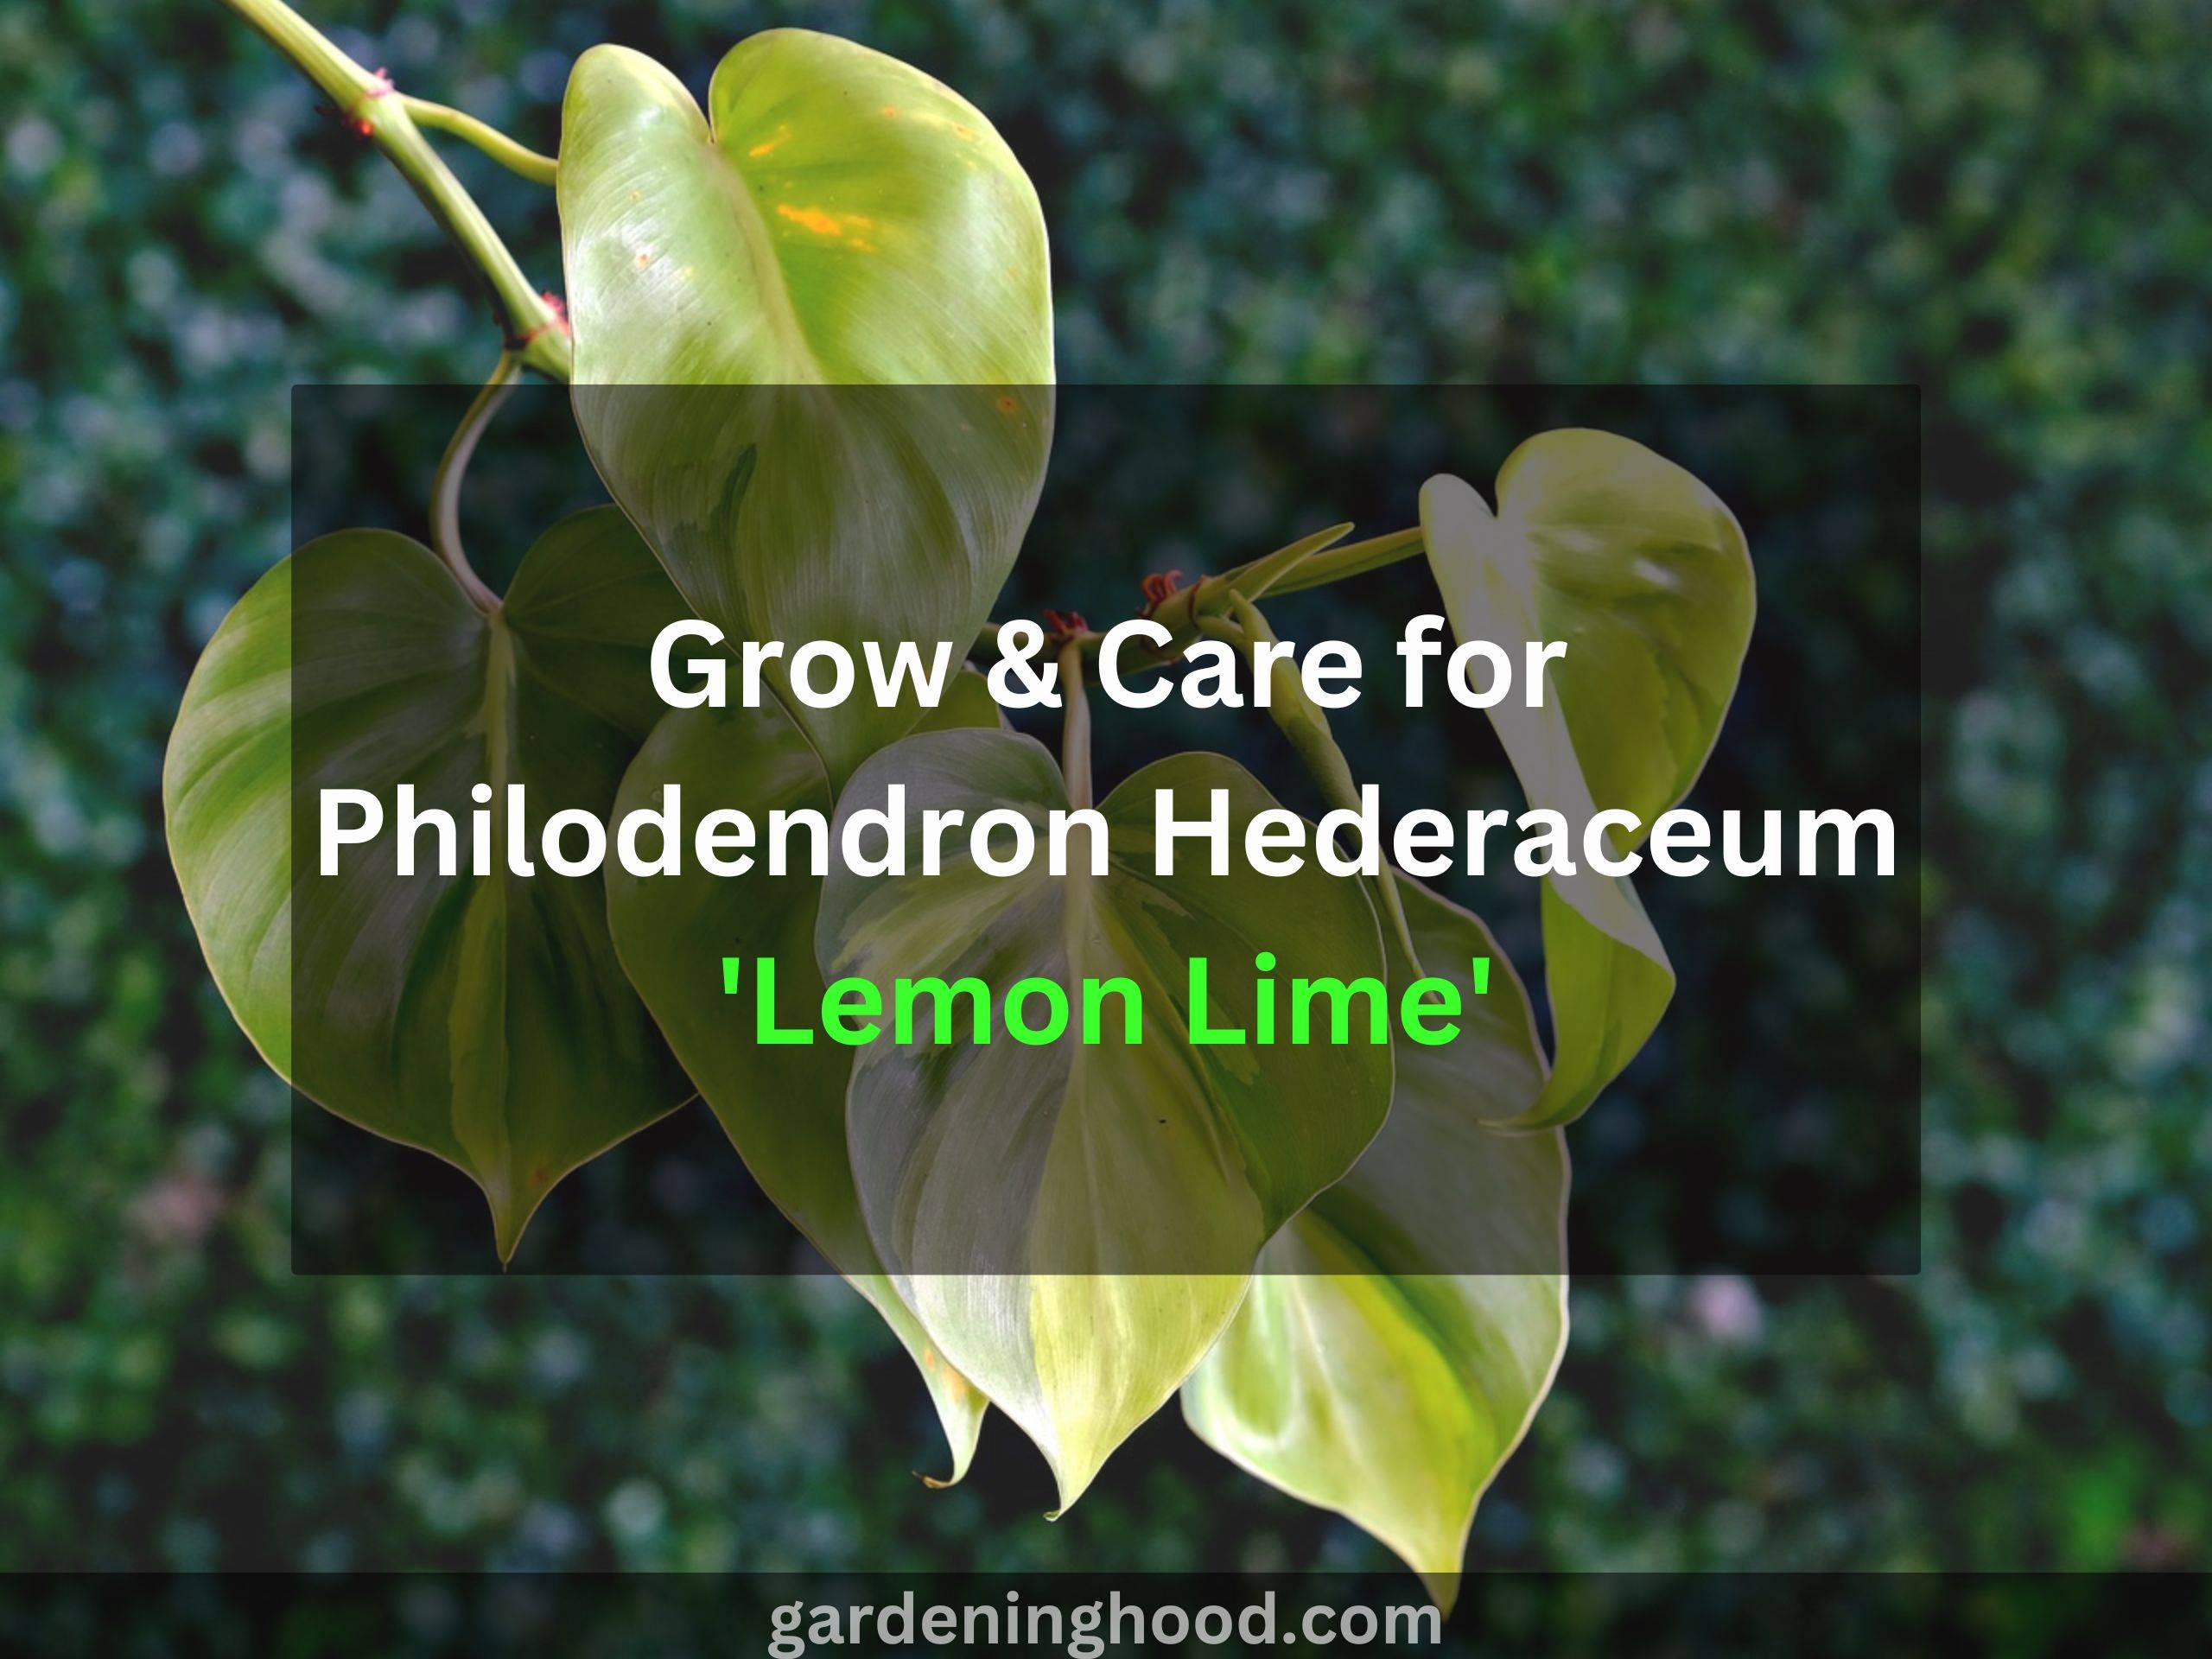 Grow & Care for Philodendron Hederaceum 'Lemon Lime'